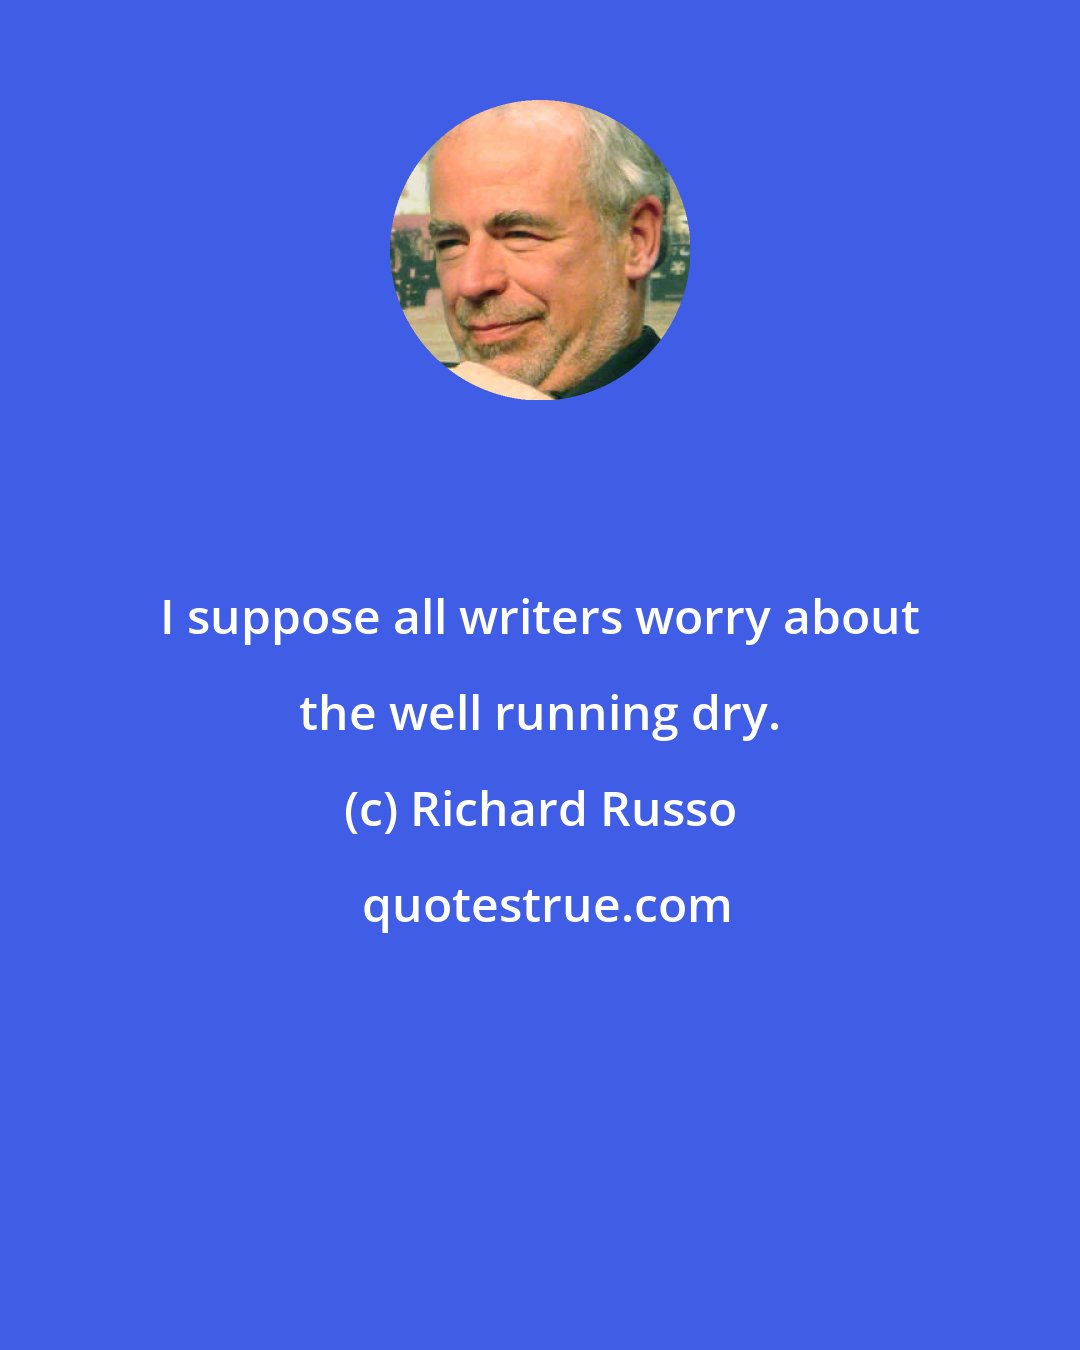 Richard Russo: I suppose all writers worry about the well running dry.